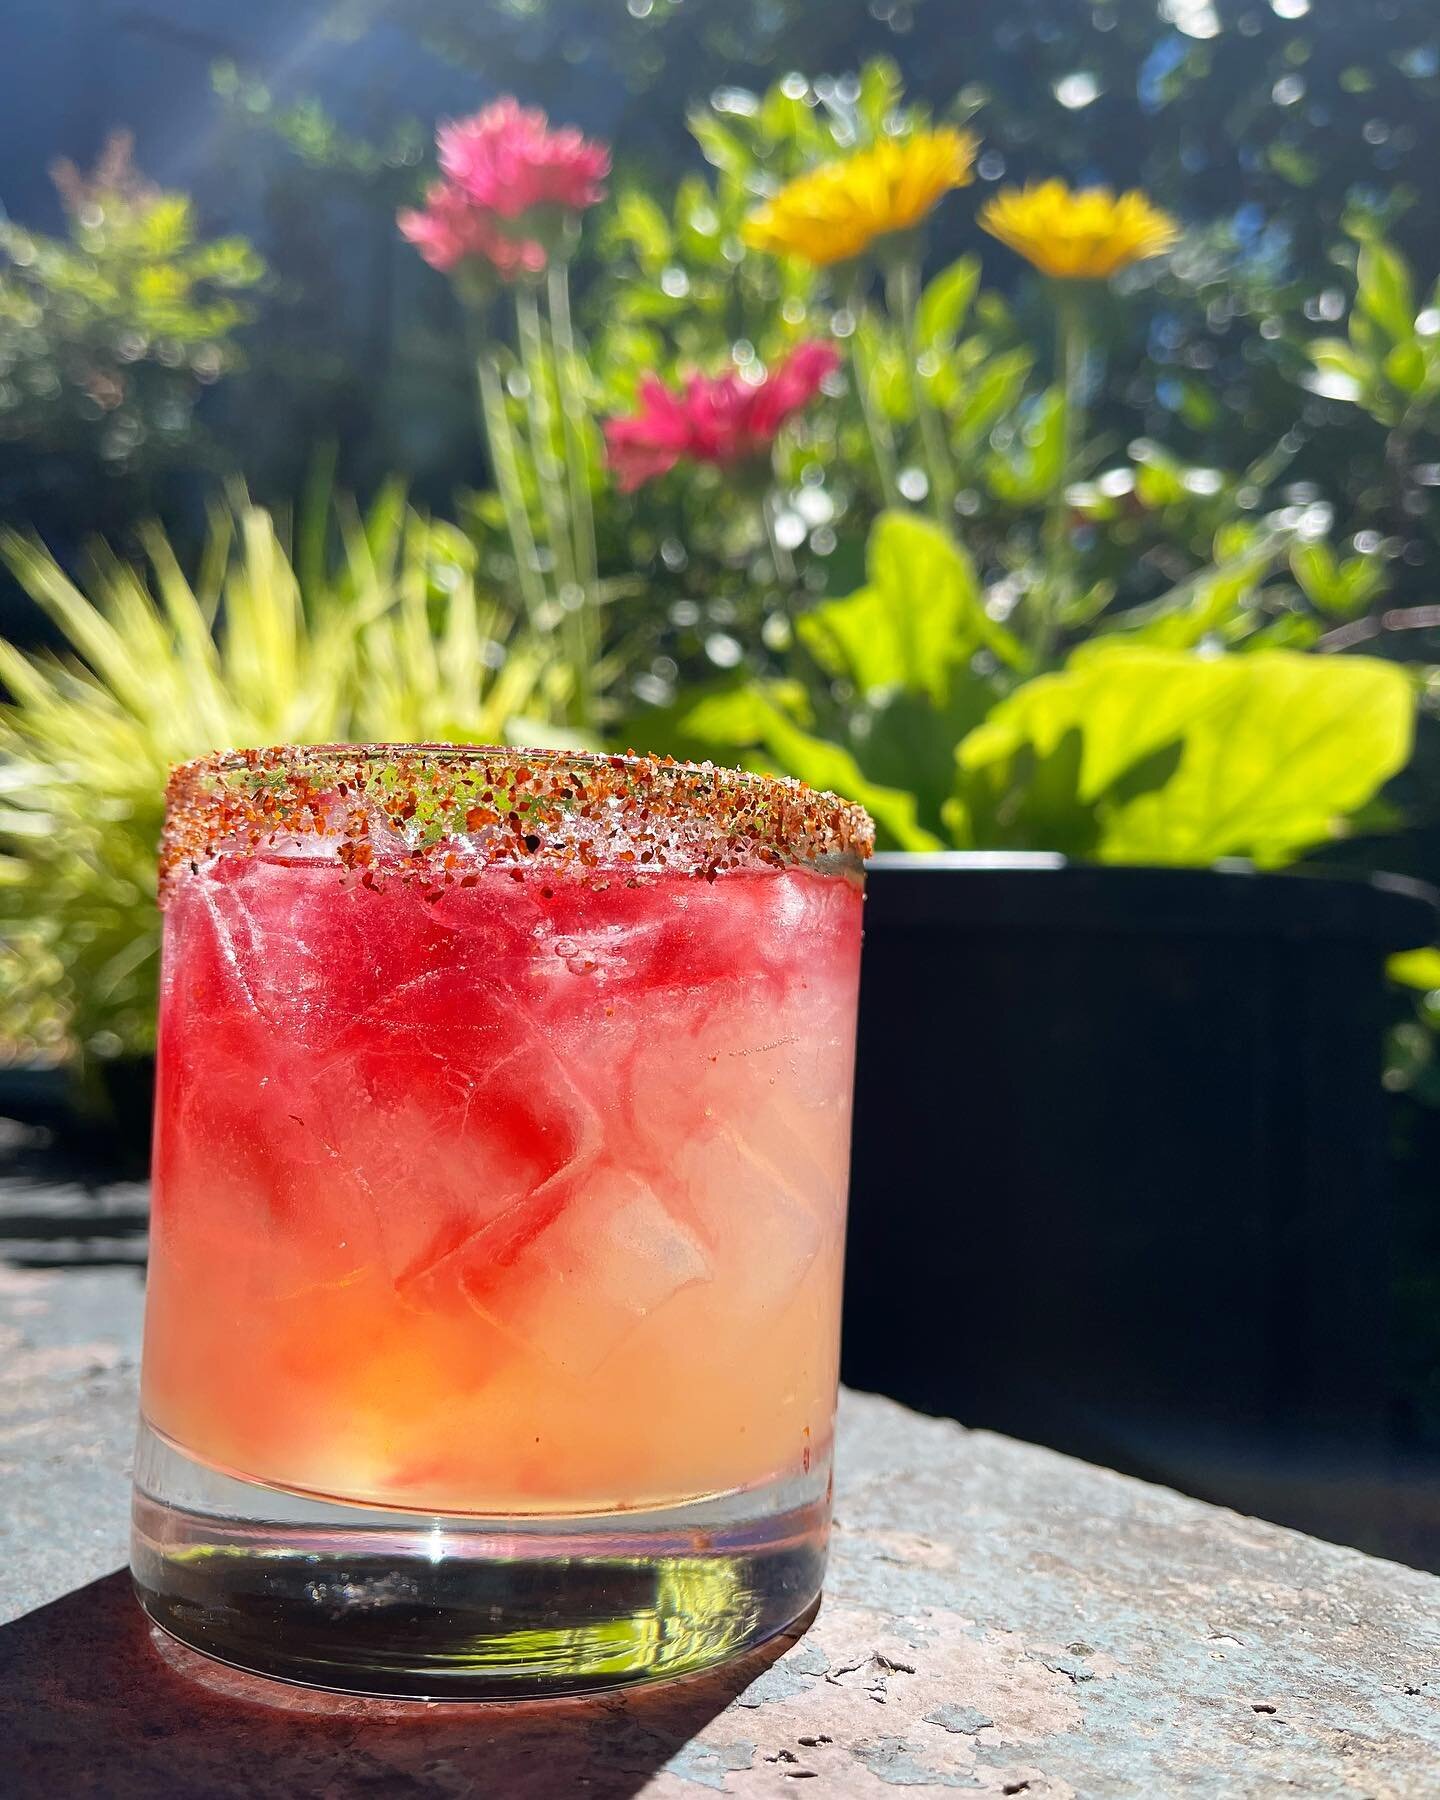 Oooooooo who&rsquo;s ready for a new cocktail?! The Pink Cadillac is a simple Lunazul Maragrita (tequila, lime, agave) with a Hibiscus🌺 infused Grand Marnier float on top and a Tajin Salt rim. Stir all together and you&rsquo;ve got 
The Pink Cadilla